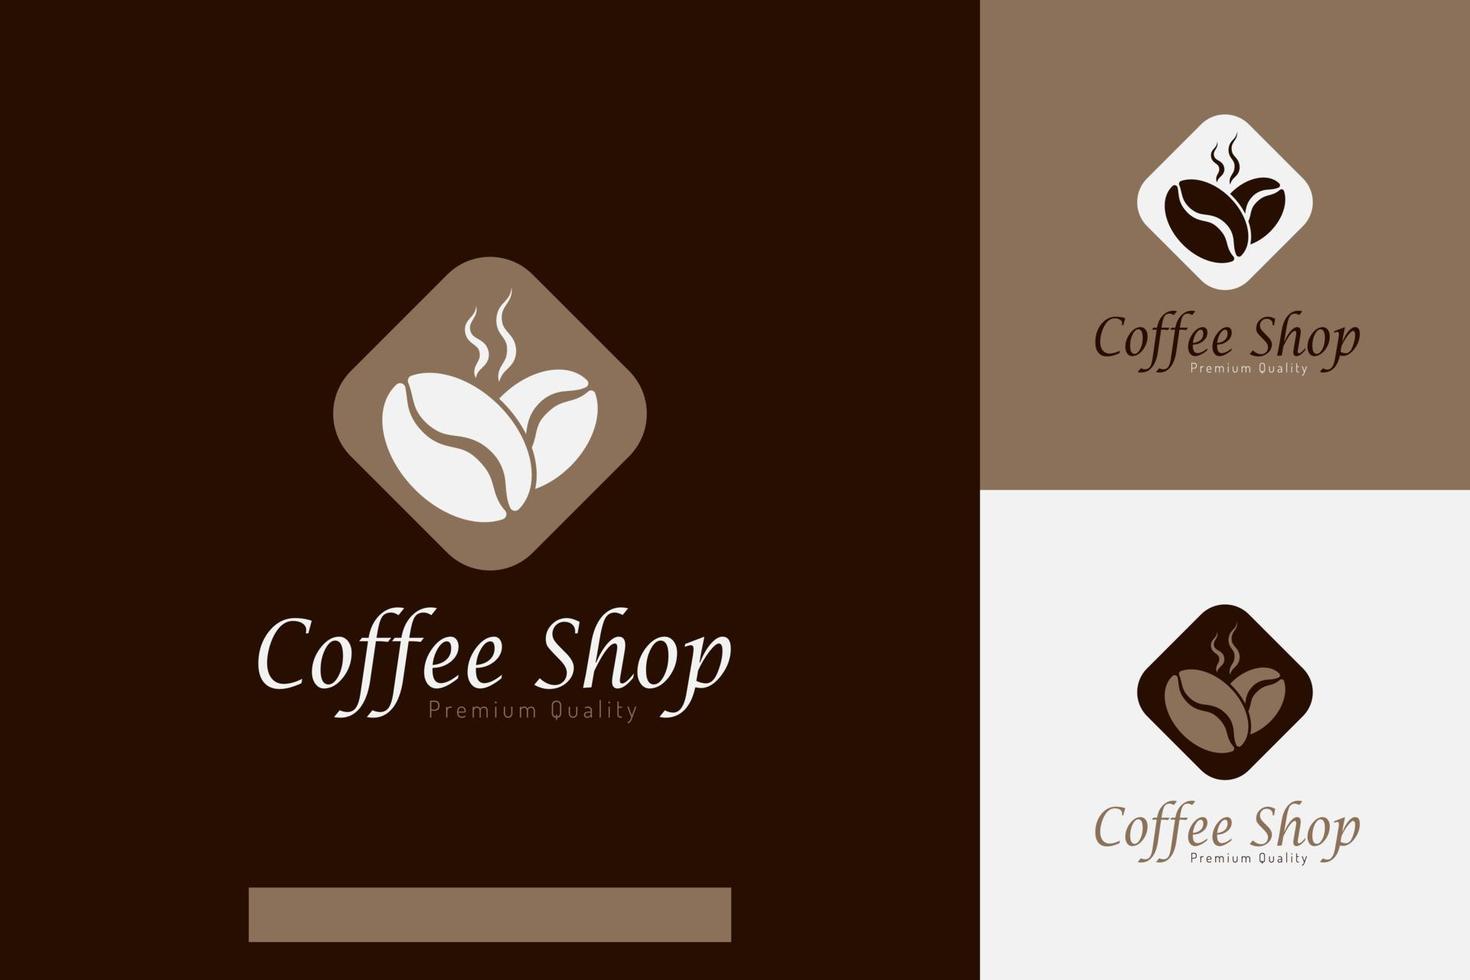 Set of coffee shop logo vector design templates with different color styles